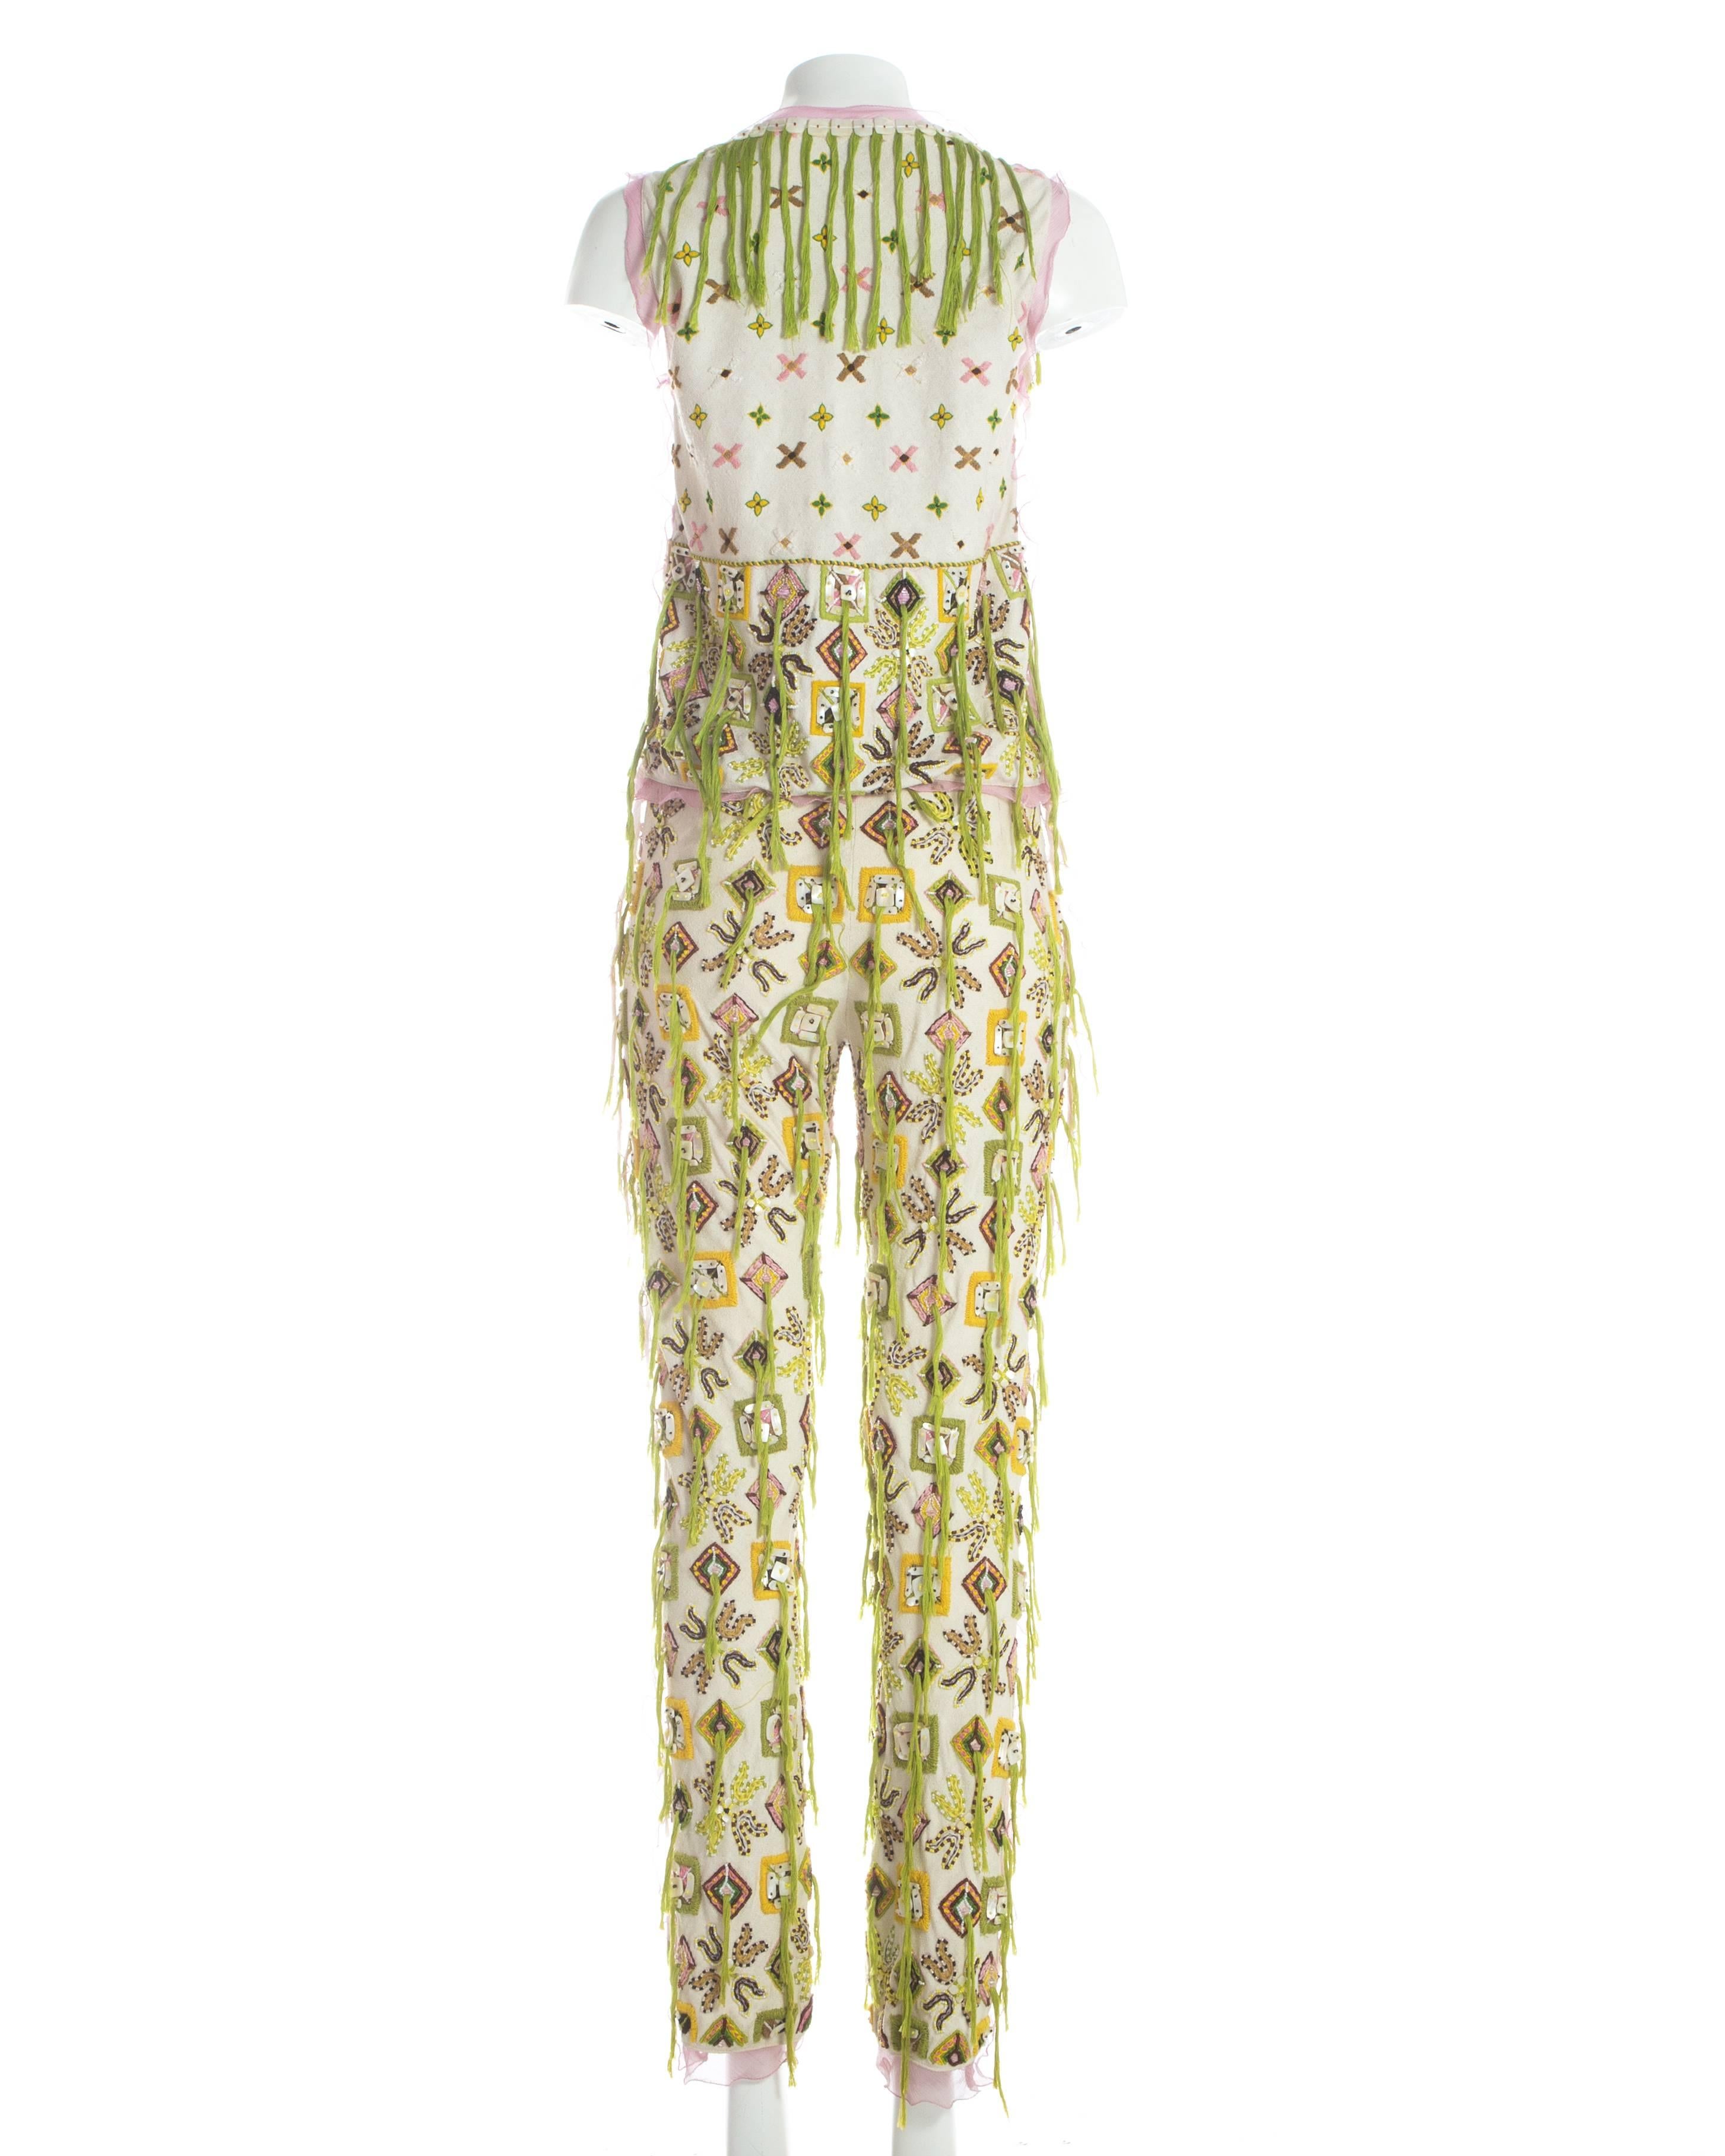 Fendi embroidered cotton pant suit fringed with silk thread, S / S 2000 2